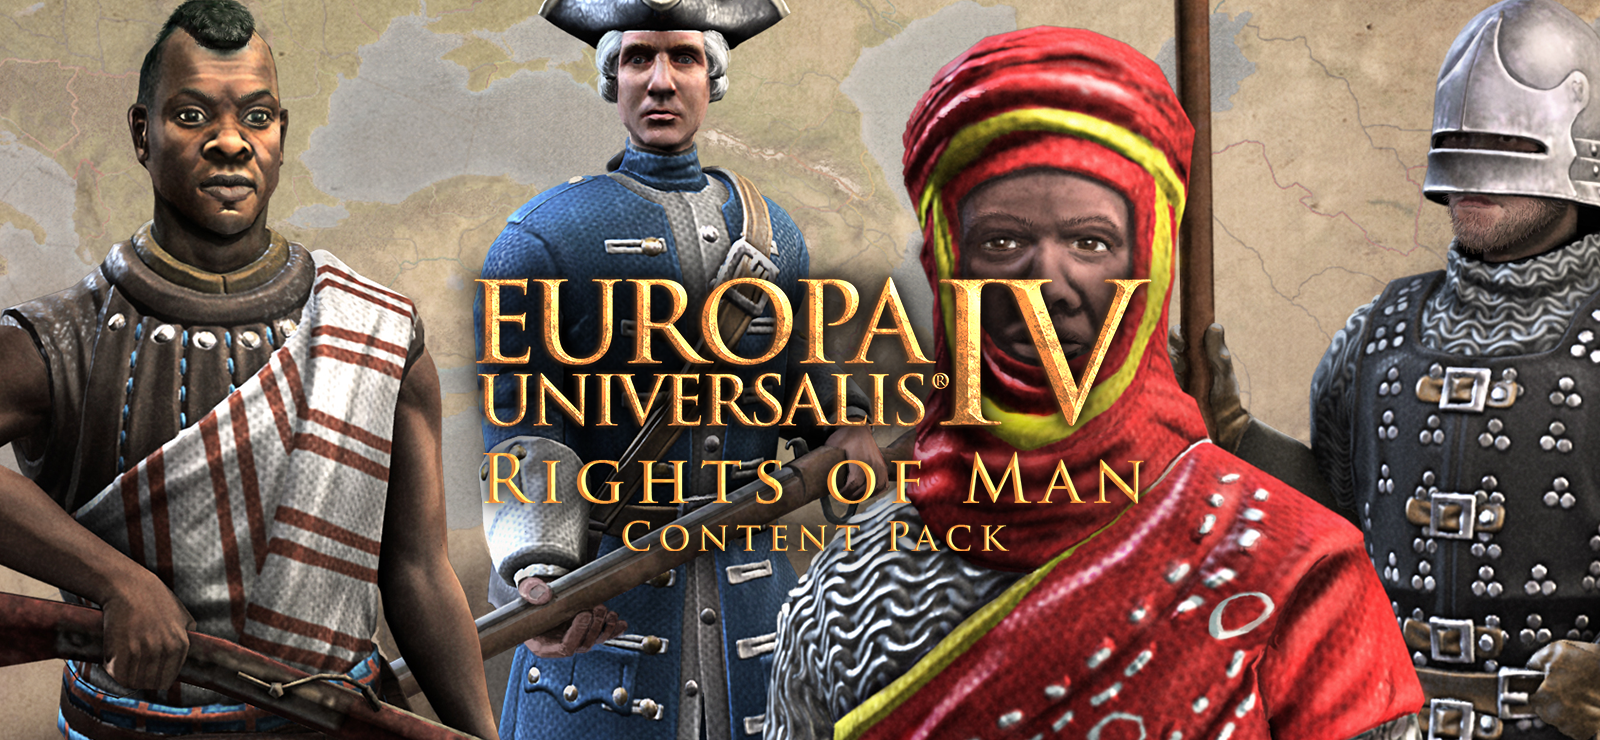 Content Pack - Europa Universalis IV: Rights Of Man